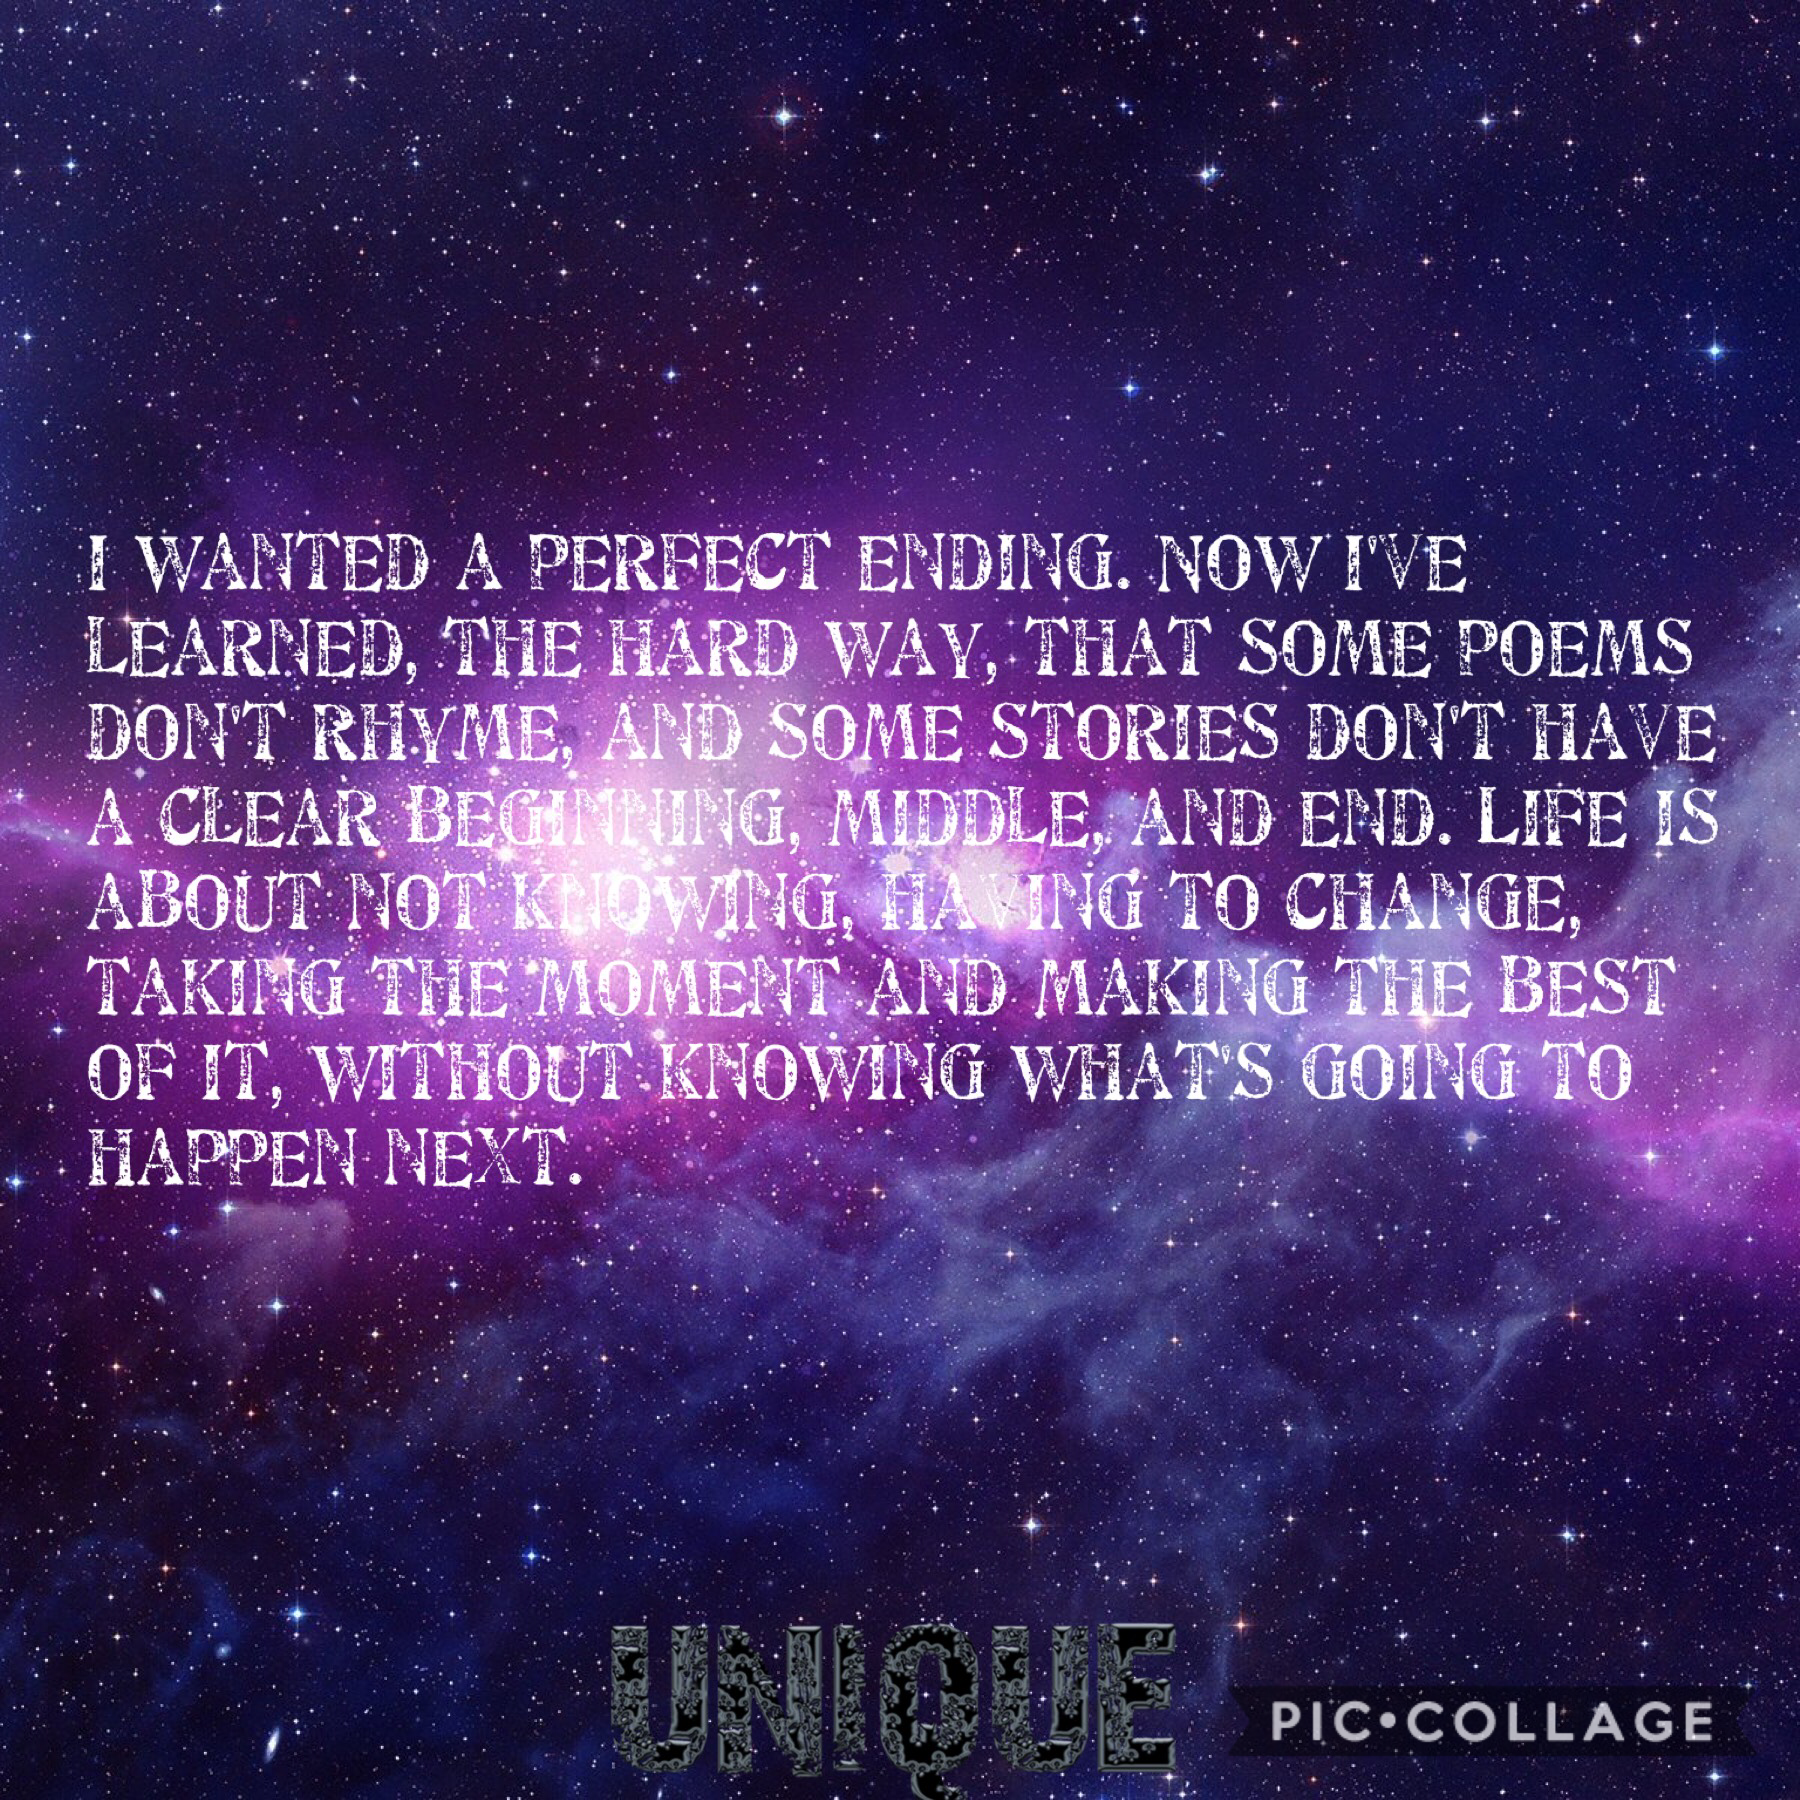 I'm putting this 'Unique' Sign on the bottom of all my collages, so that way people know I made it myself, with out plagerising or copying without permission. These quotes I made, that either I saw on other collages and decided to reword them for my quote